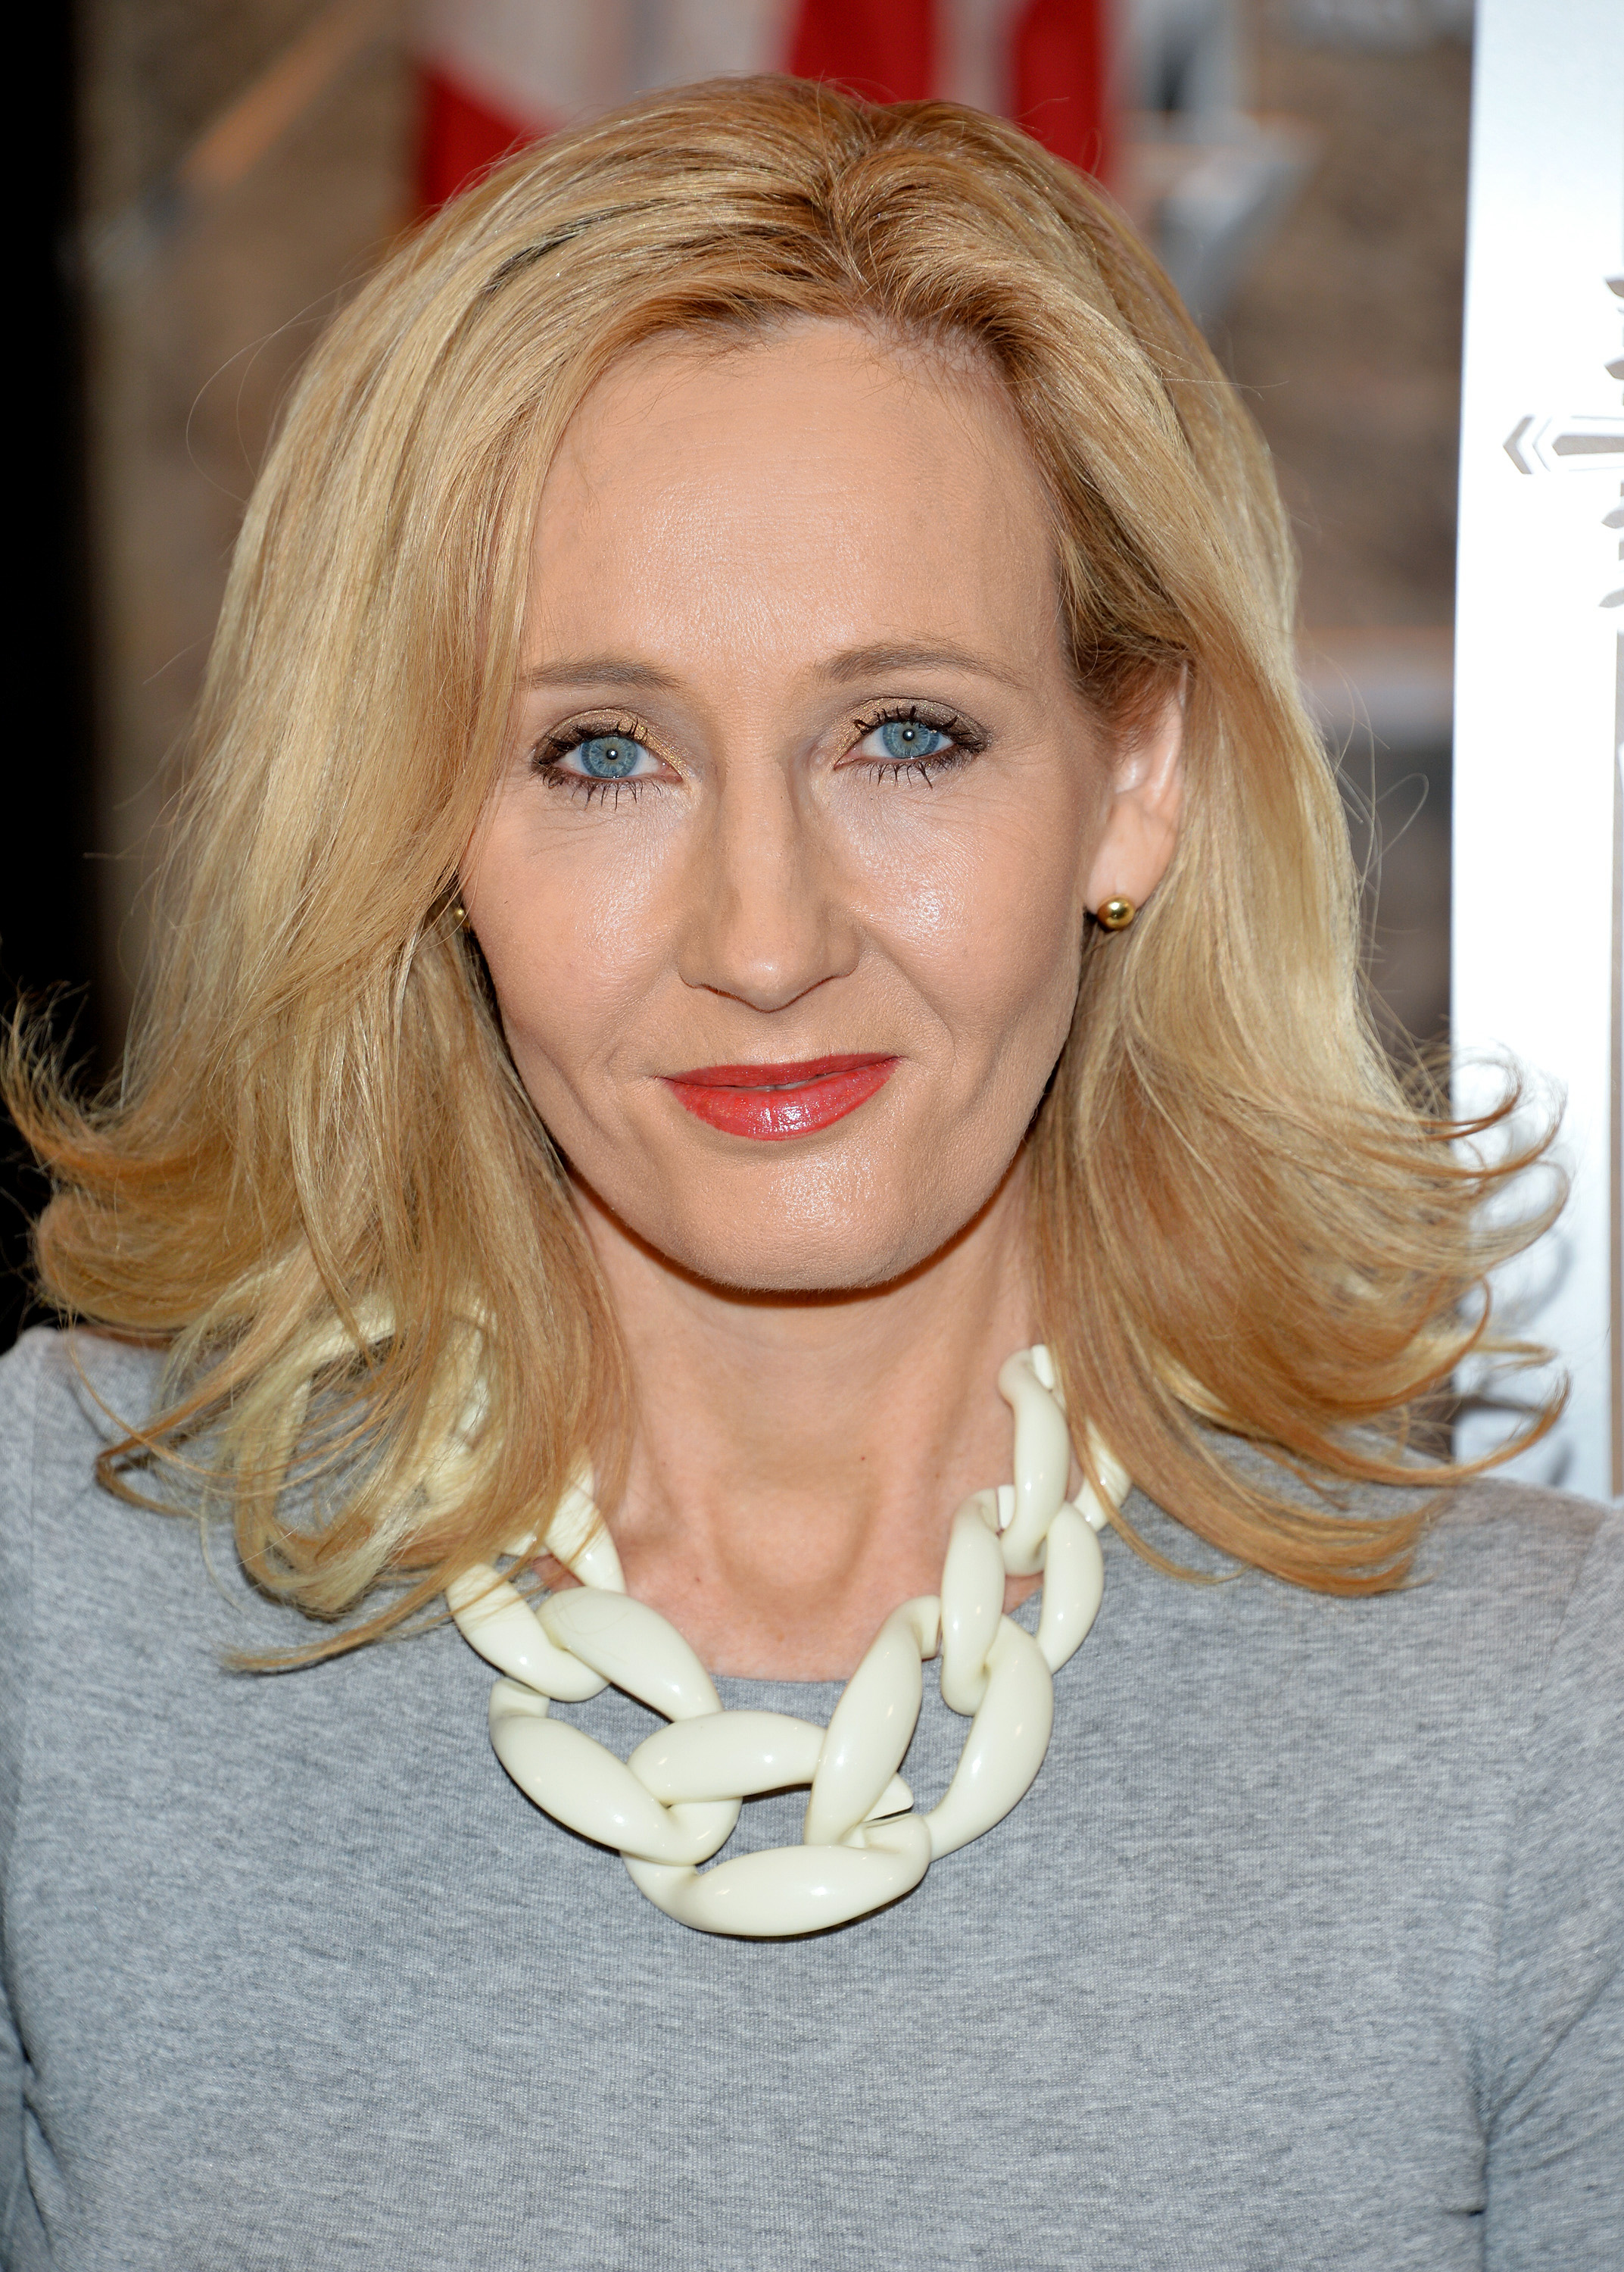 Author J.K. Rowling at the Empire State Building in New York City on April 9, 2015.